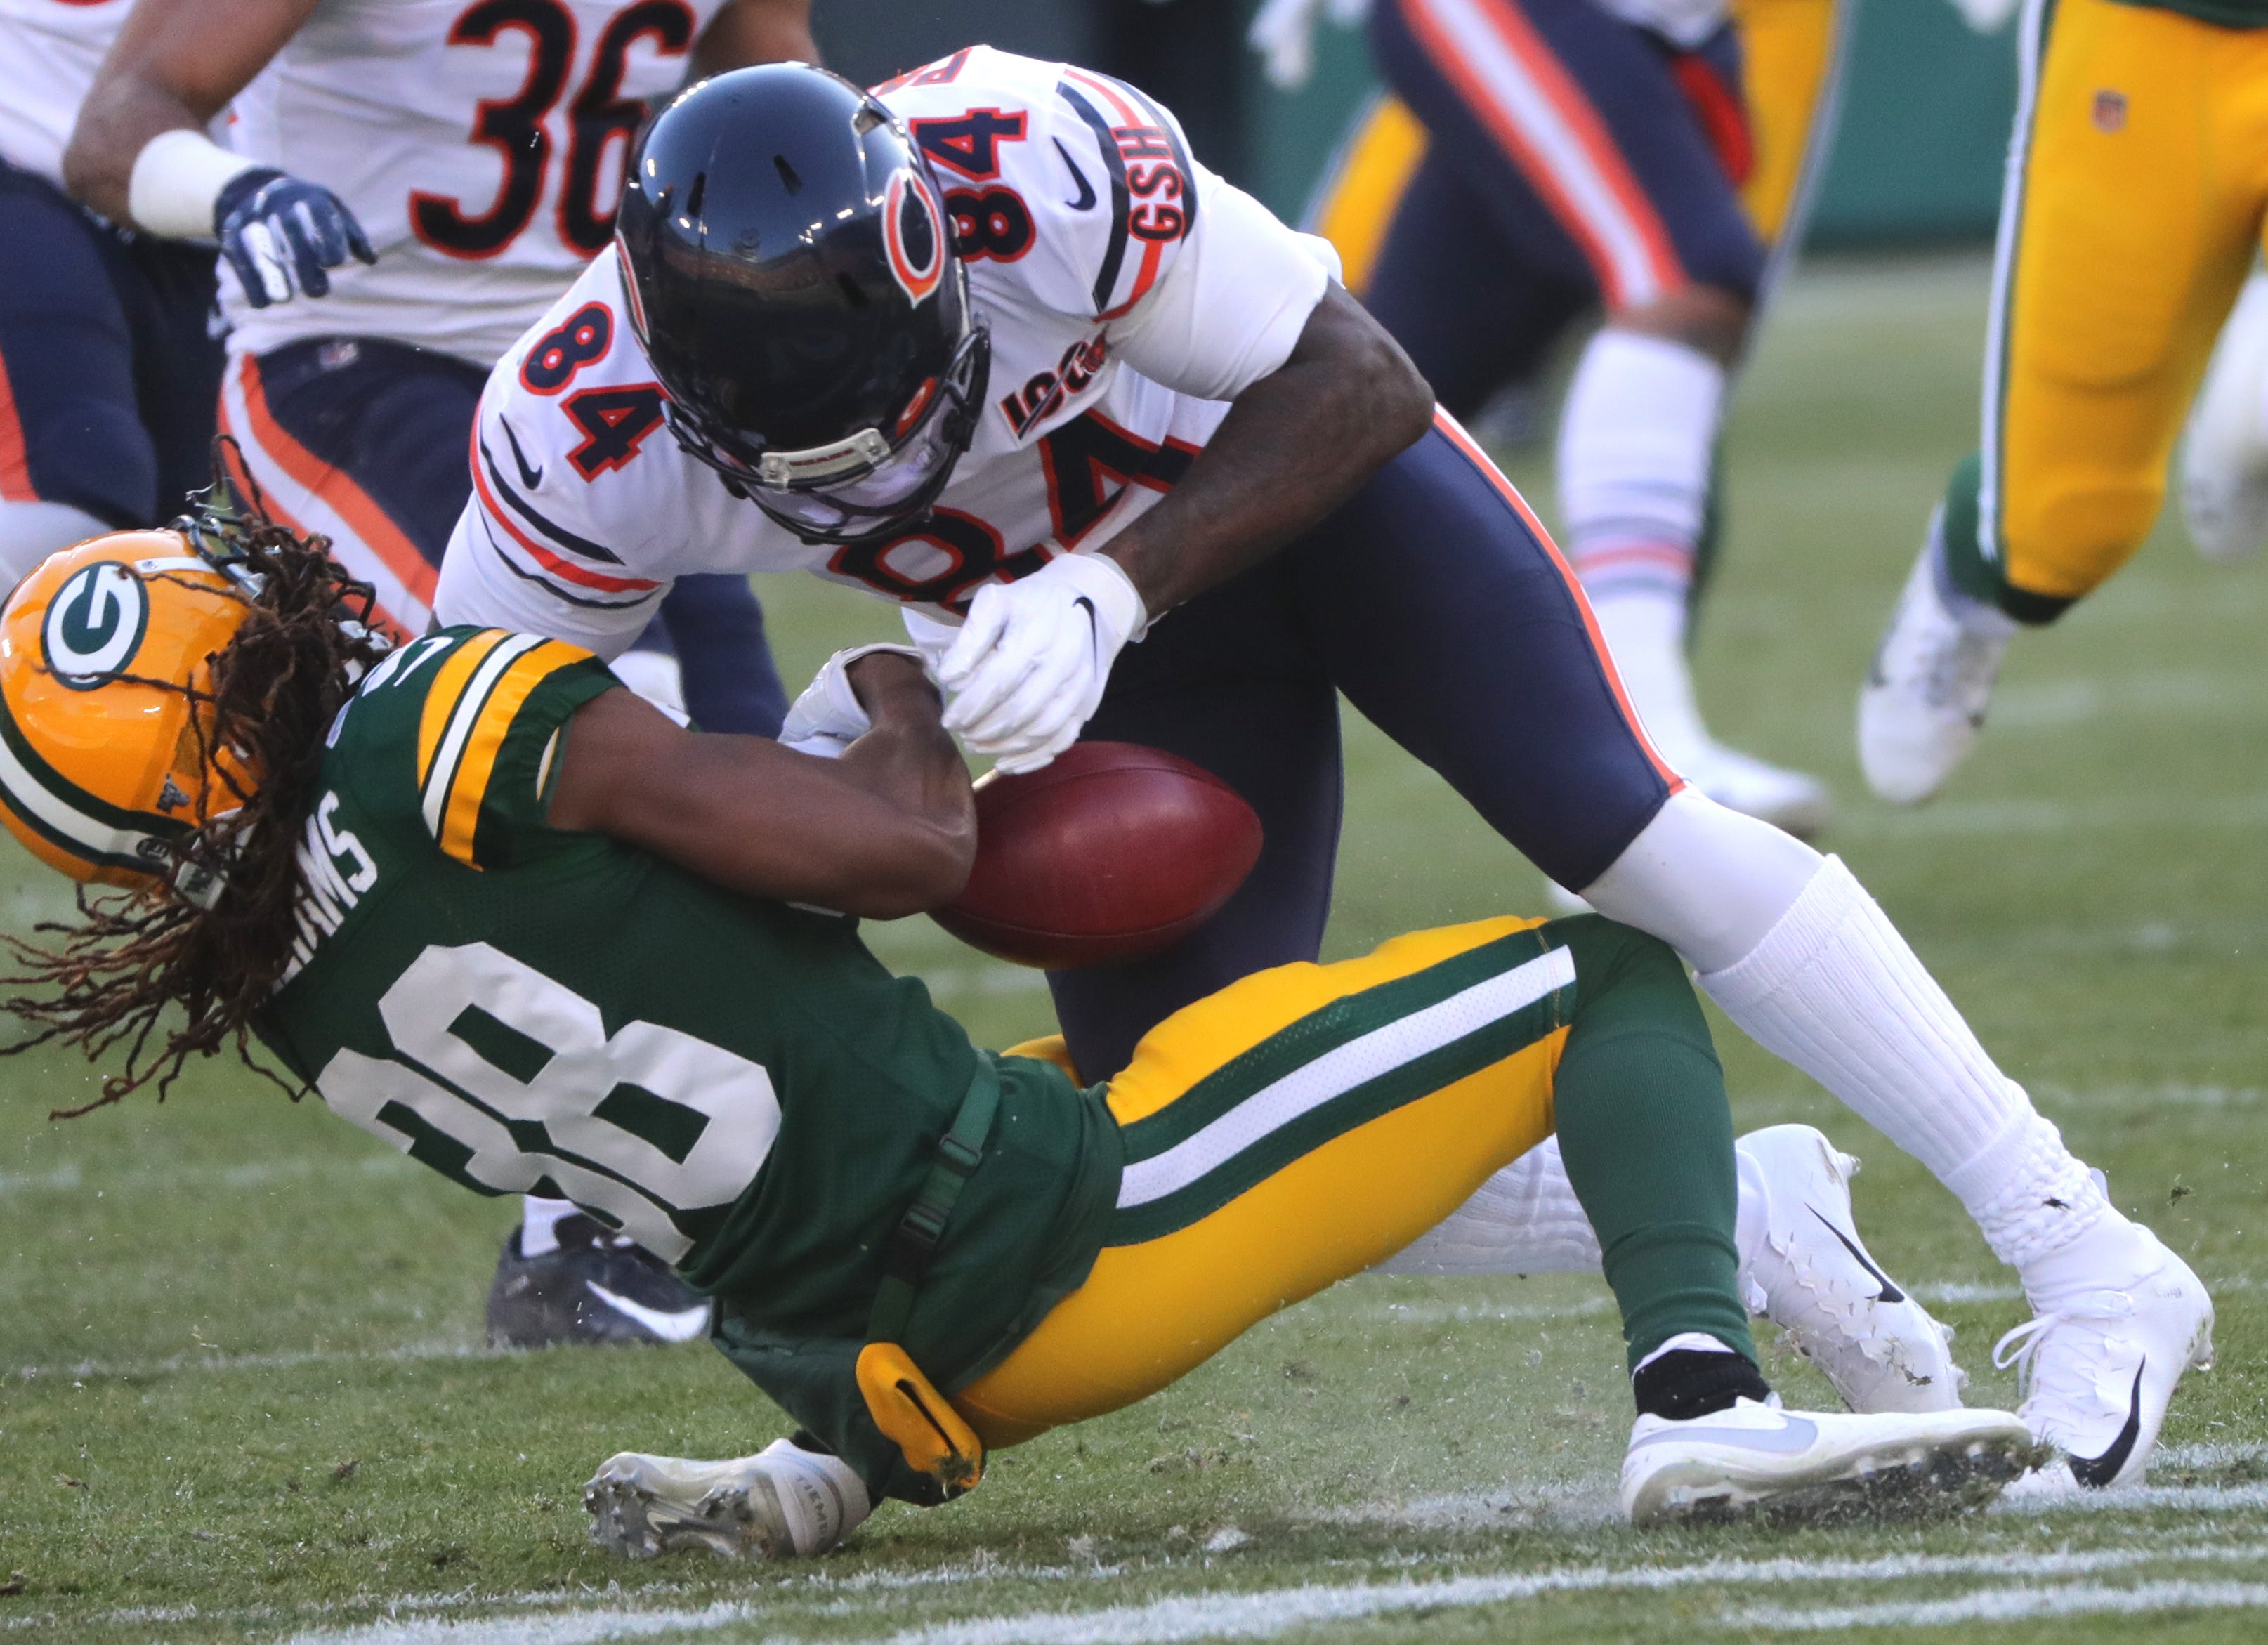 Chicago Bears wide receiver Cordarrelle Patterson (84) drills Green Bay Packers cornerback Tramon Williams (38) while field a punt during the first quarter of their game Sunday, December 15, 2019 at Lambeau Field in Green Bay, Wis. The Bears were penalized for interference on the play.